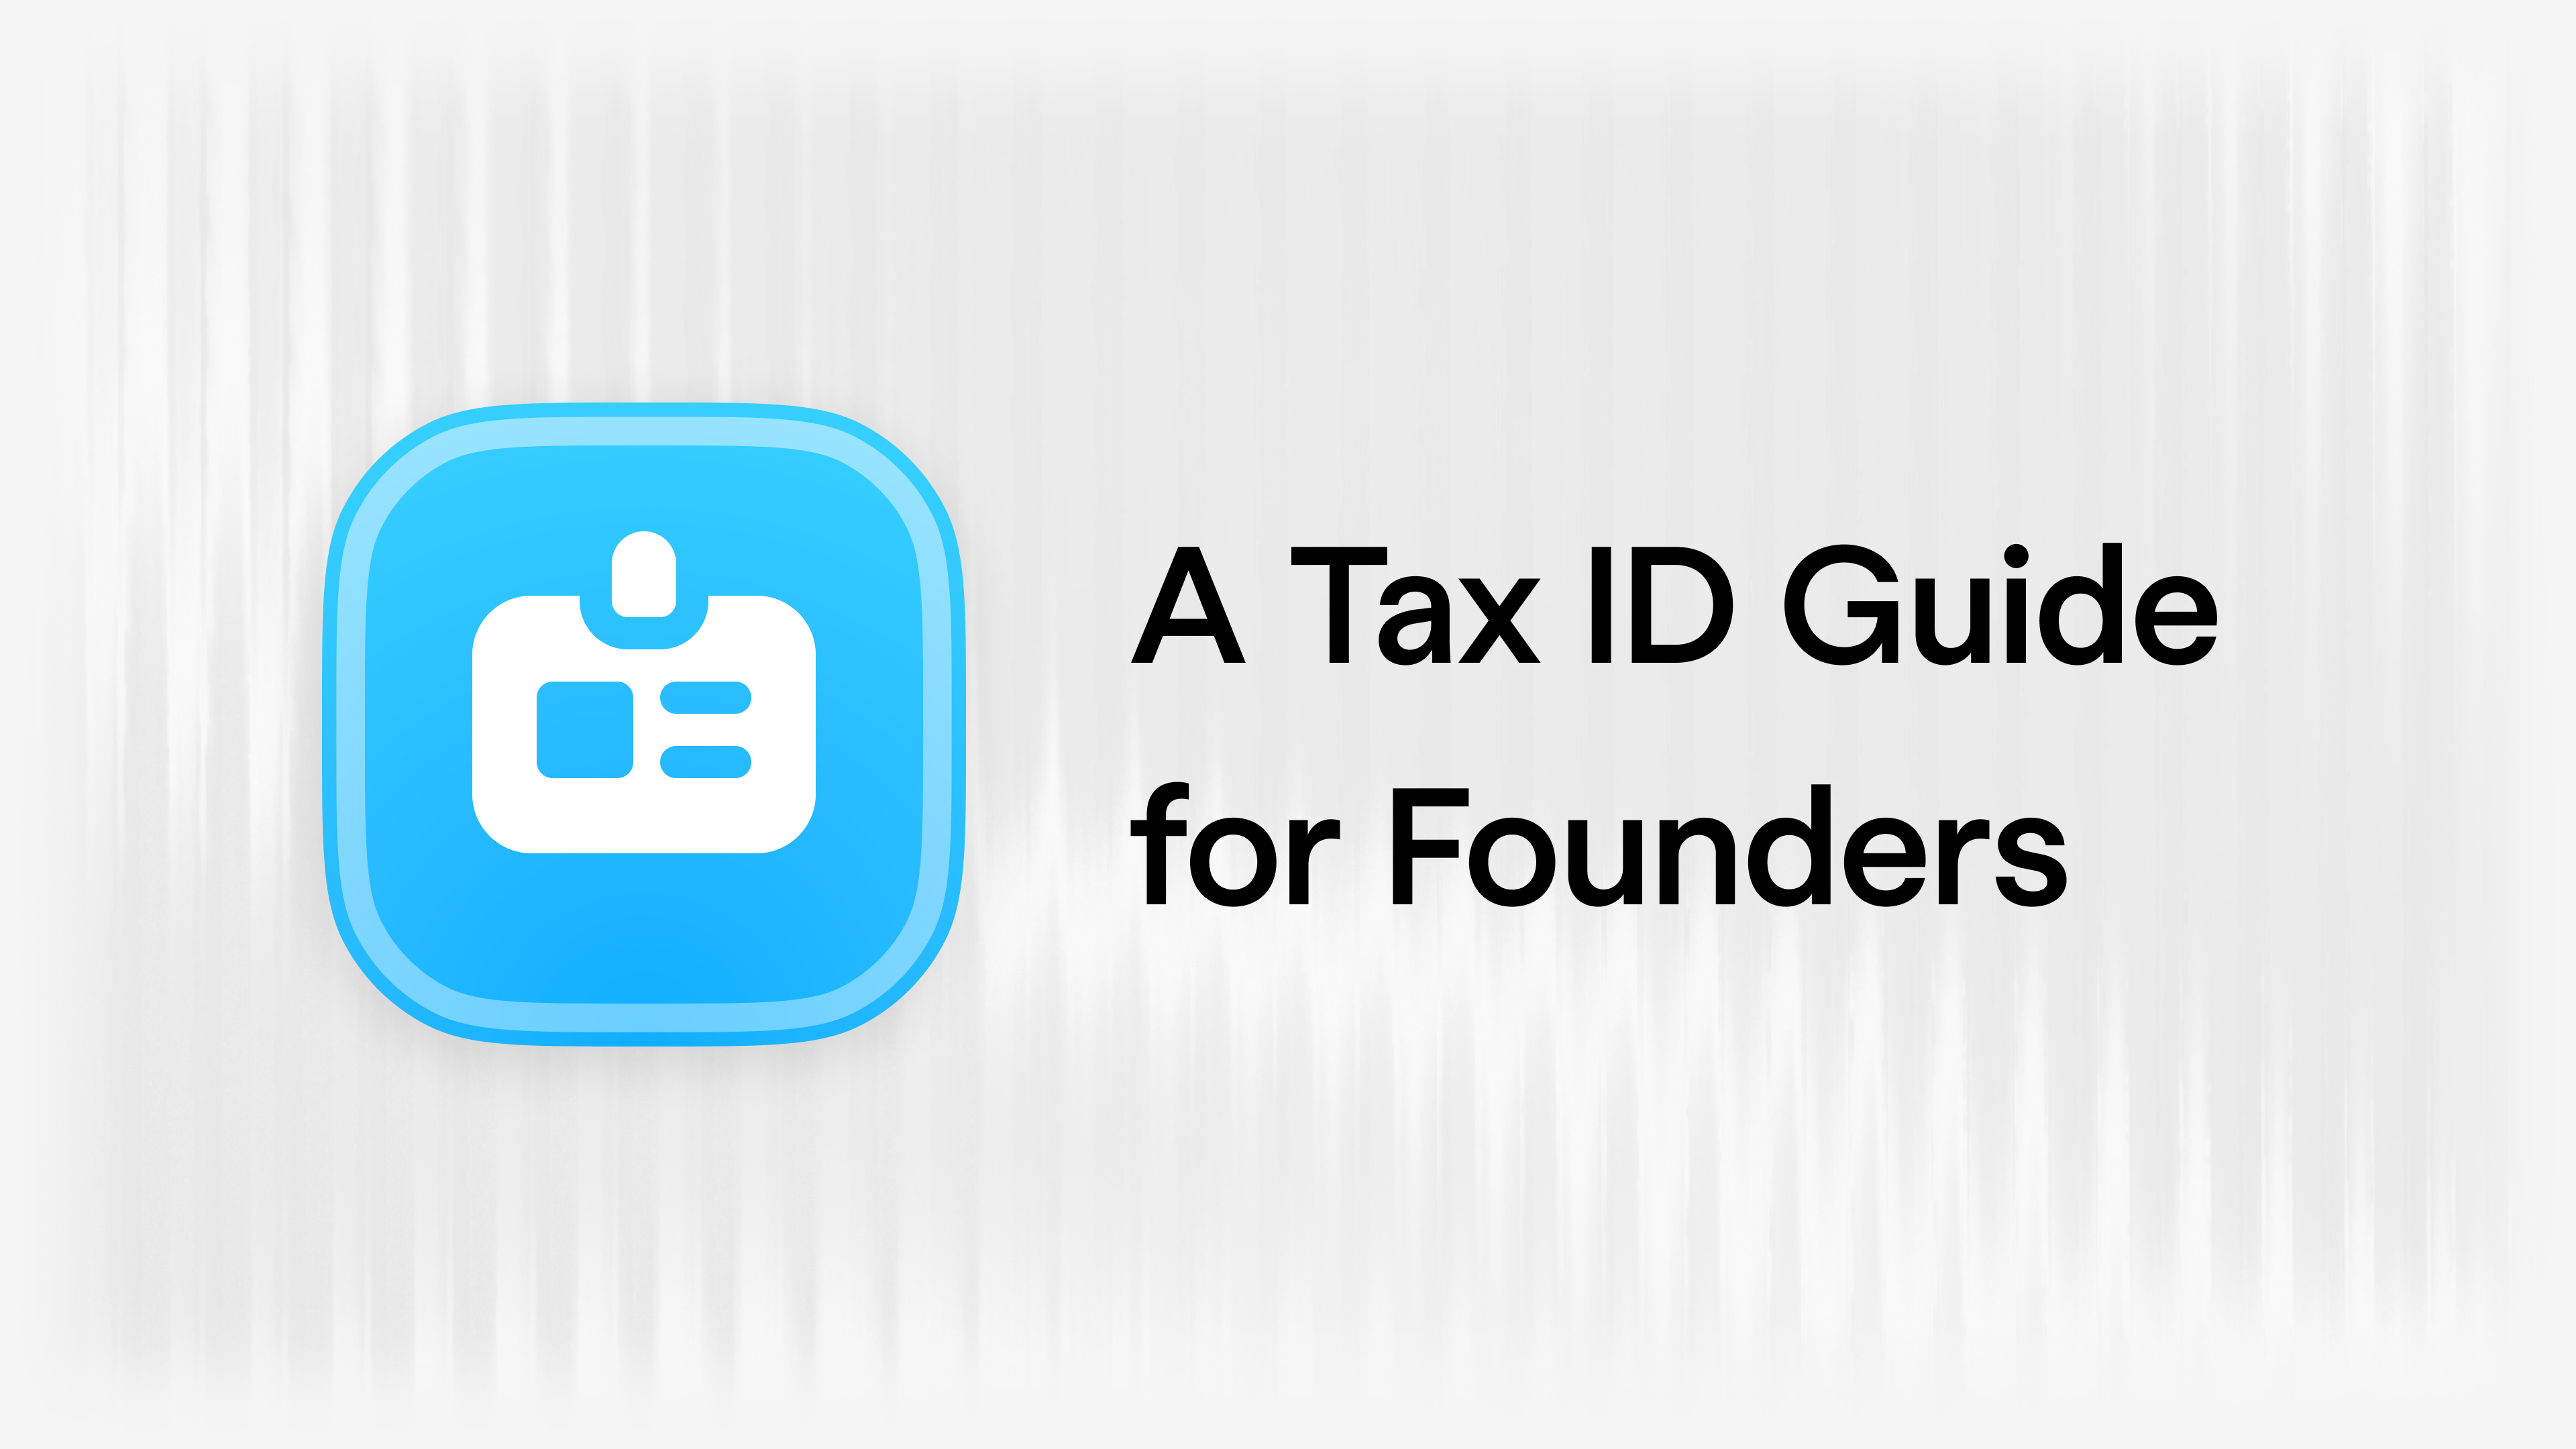 SSN, ITIN, and EIN: A Tax ID Guide for Founders article visual